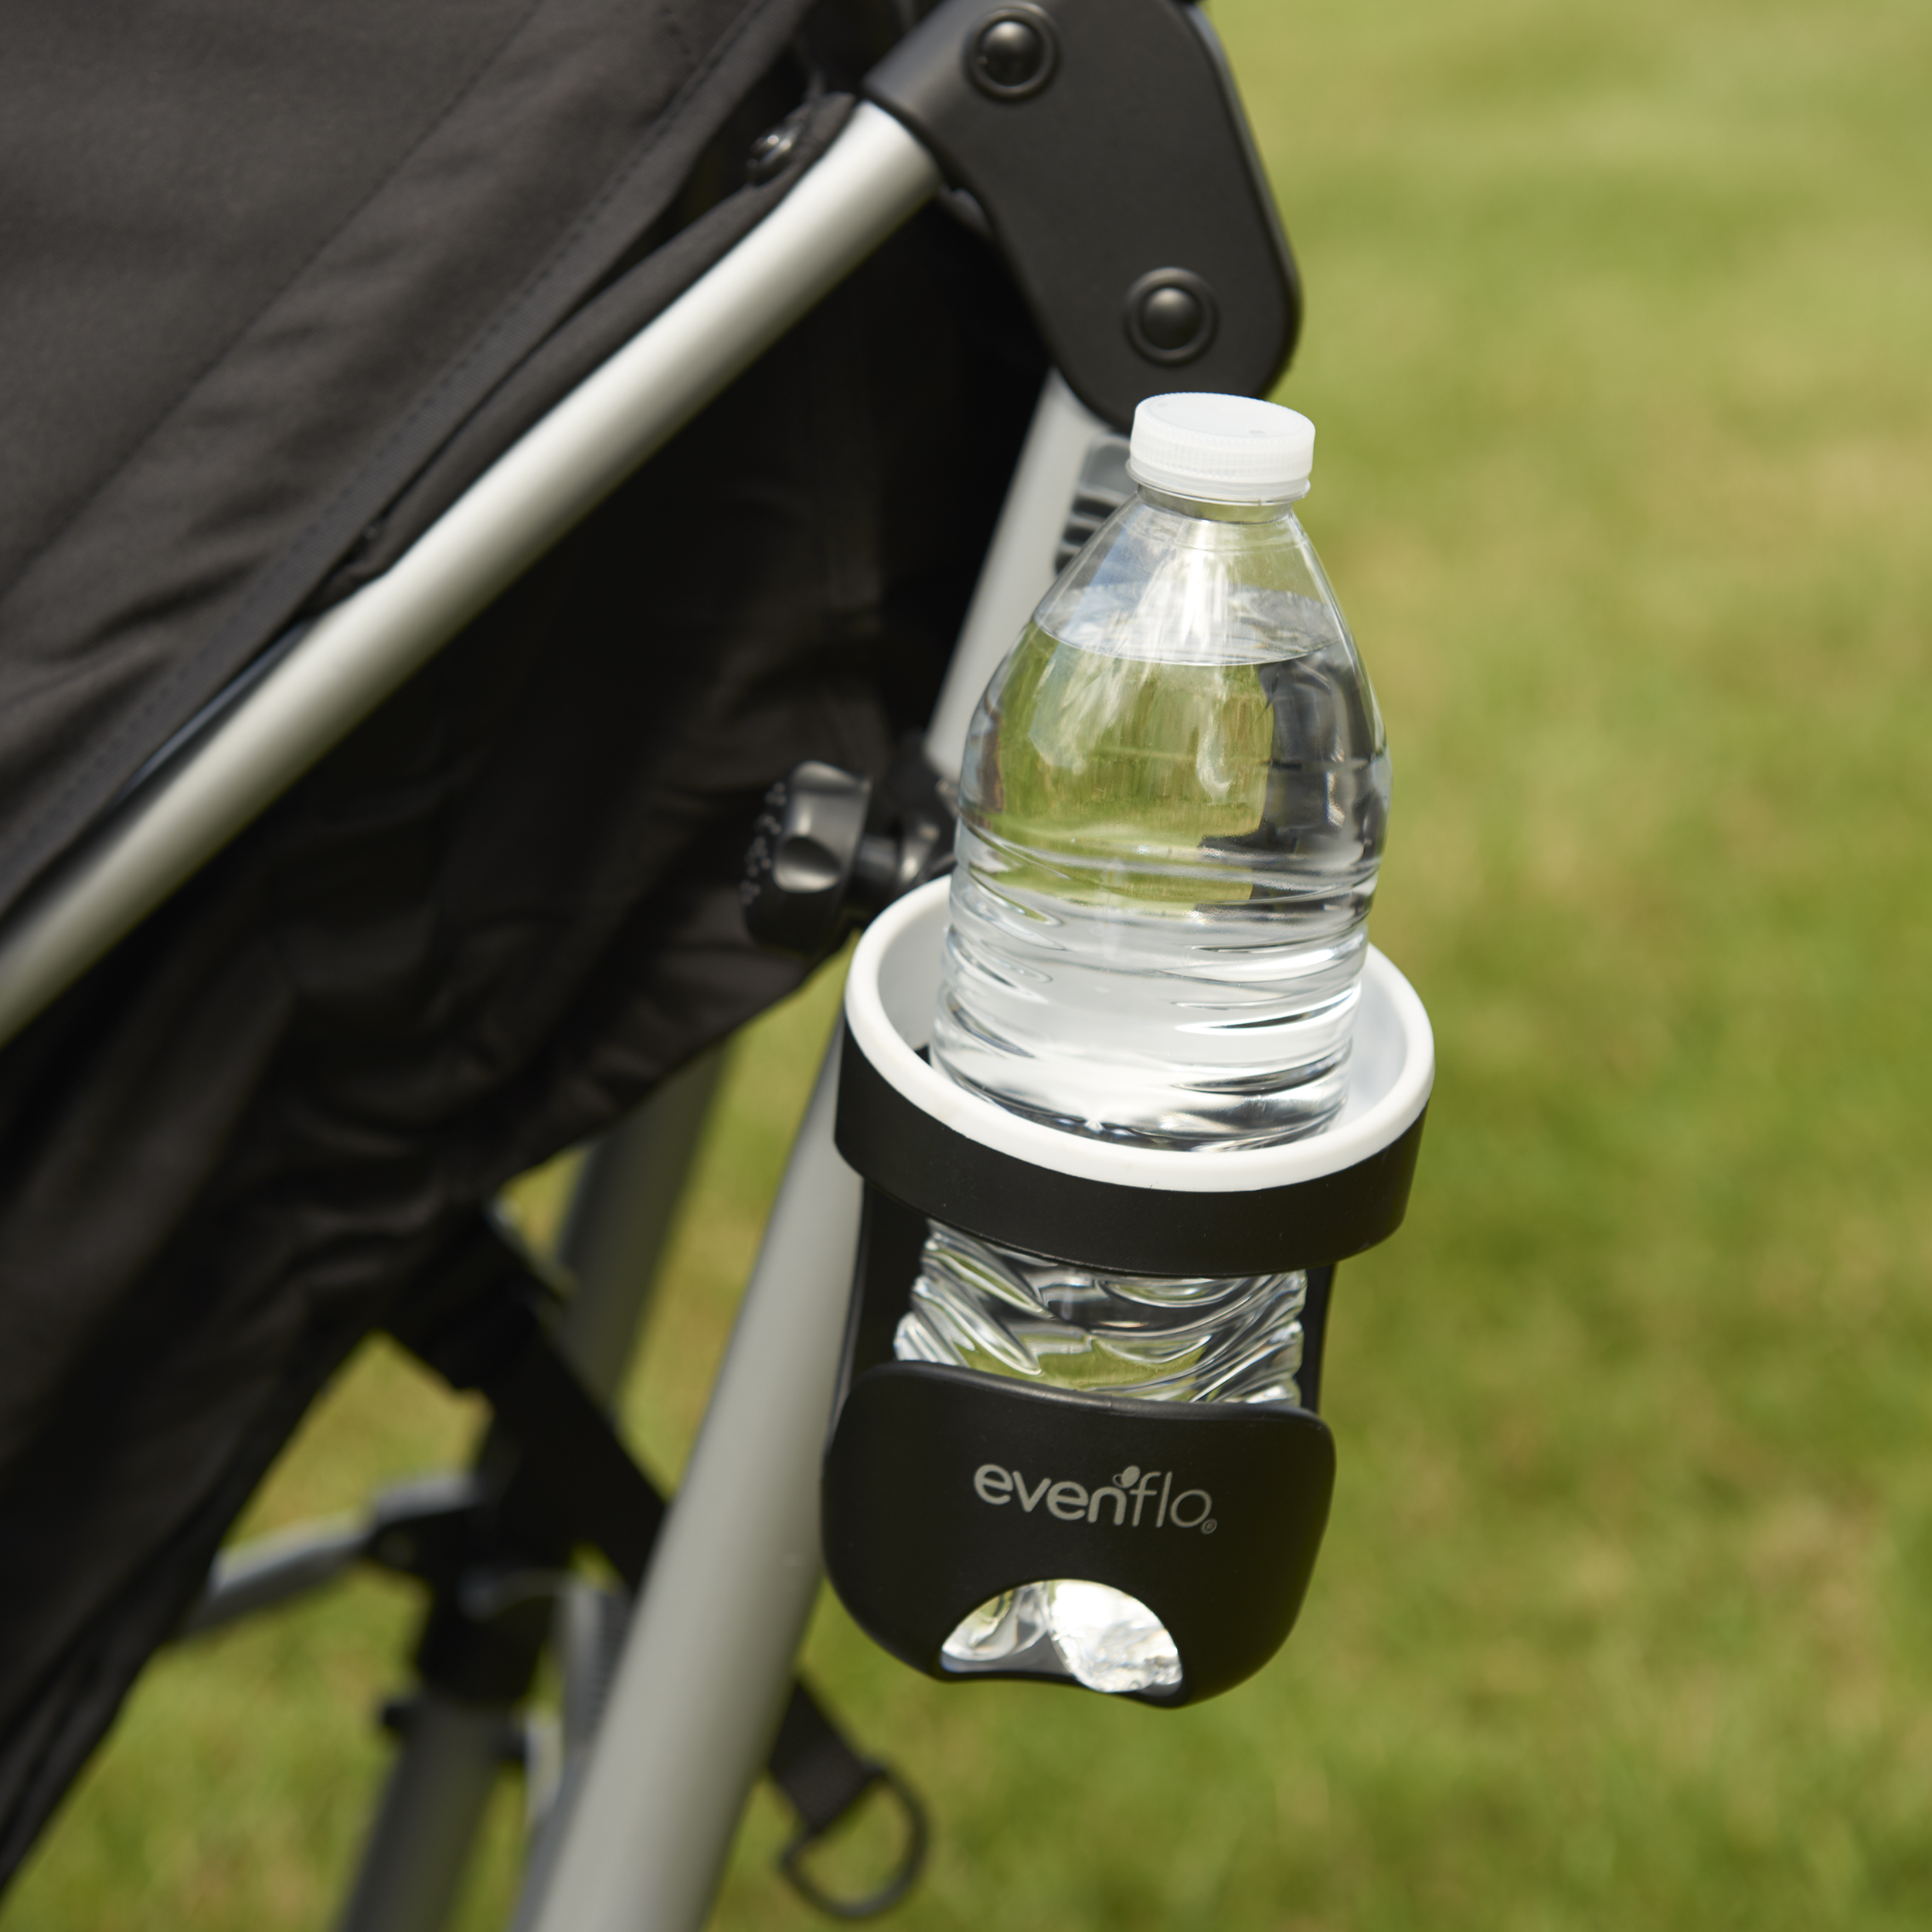 Universal Cup Holder For Strollers